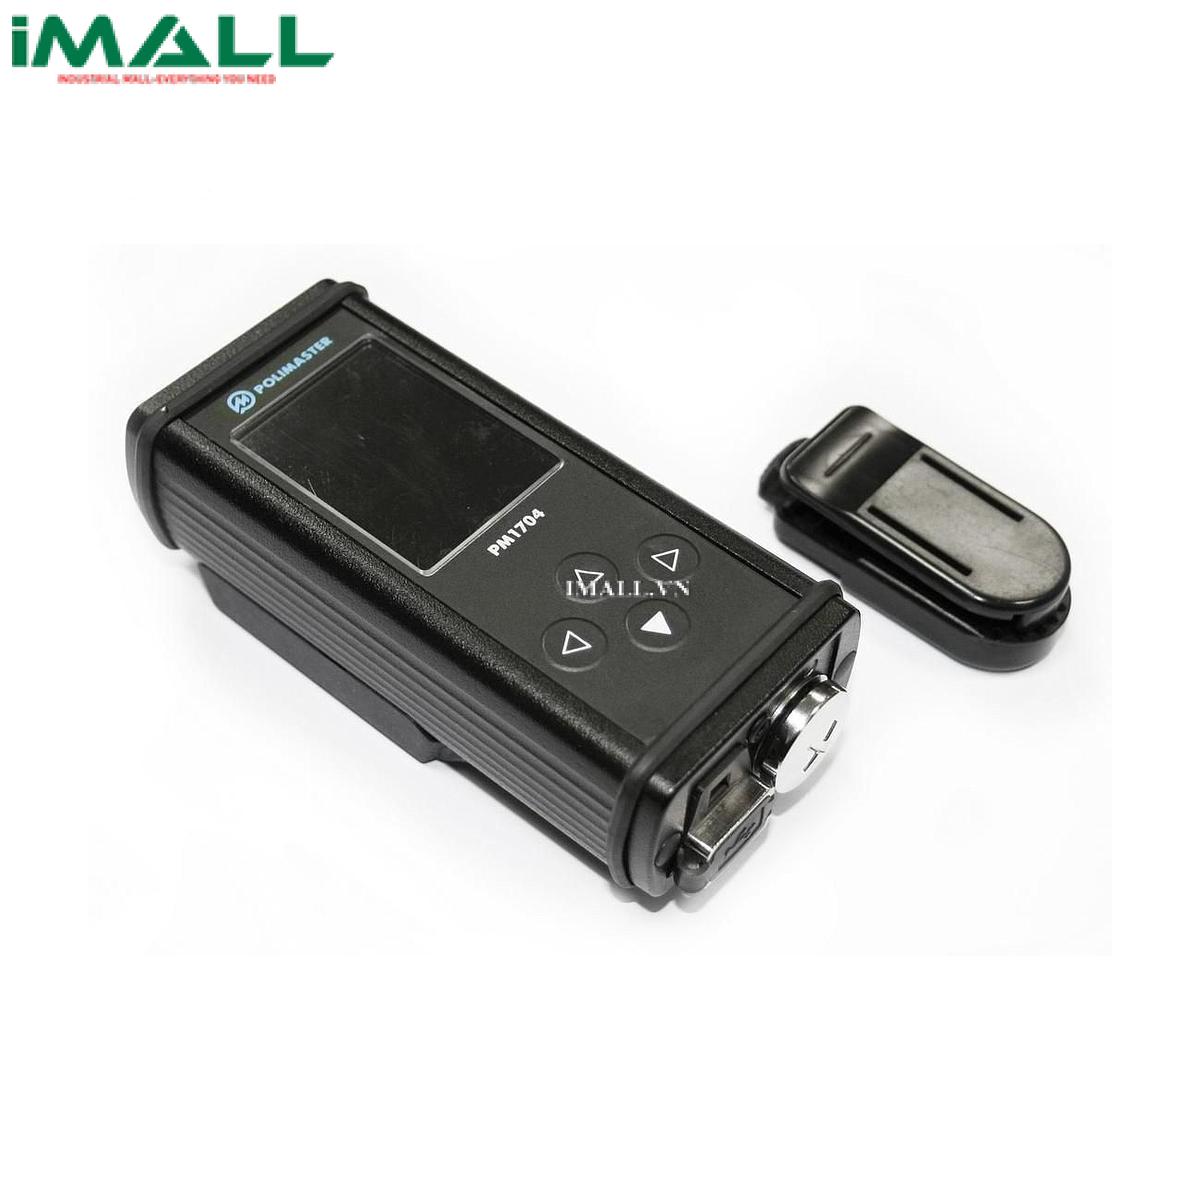 Spectroscopic Personal Radiation Detectors Polimaster PM1704GN